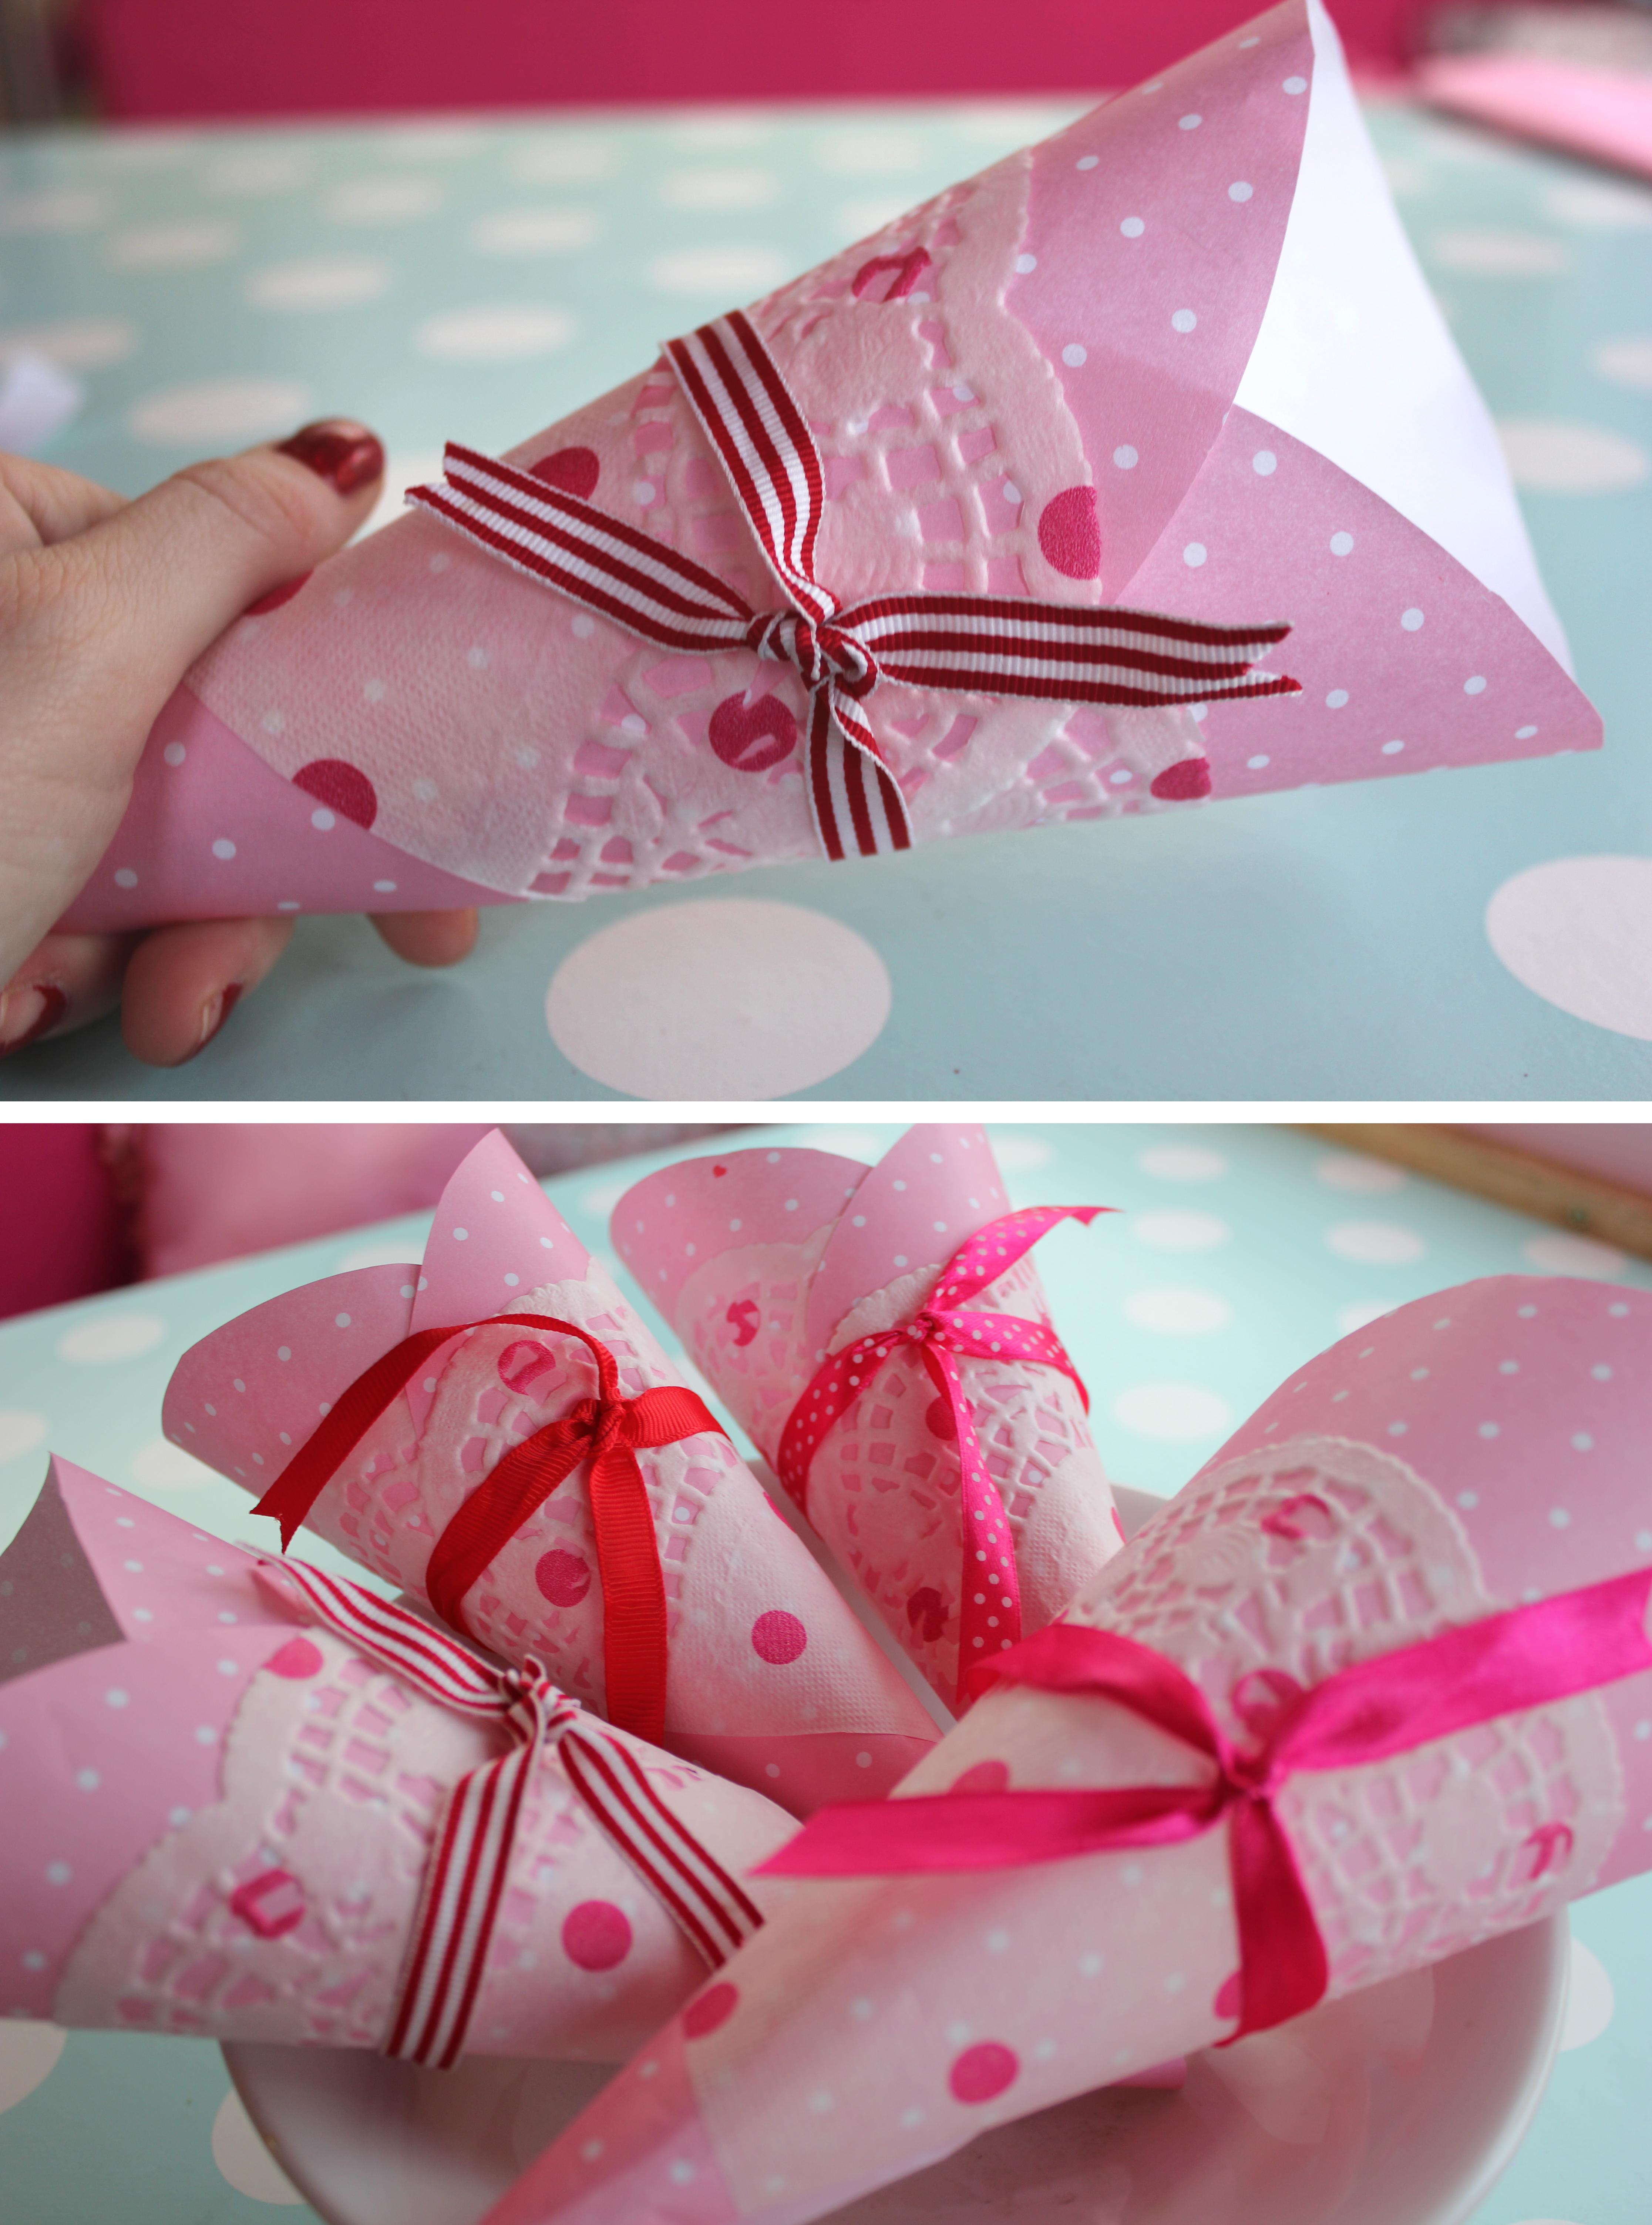 DIY pink paper birthday party cones with doilies for popcorn or sweets